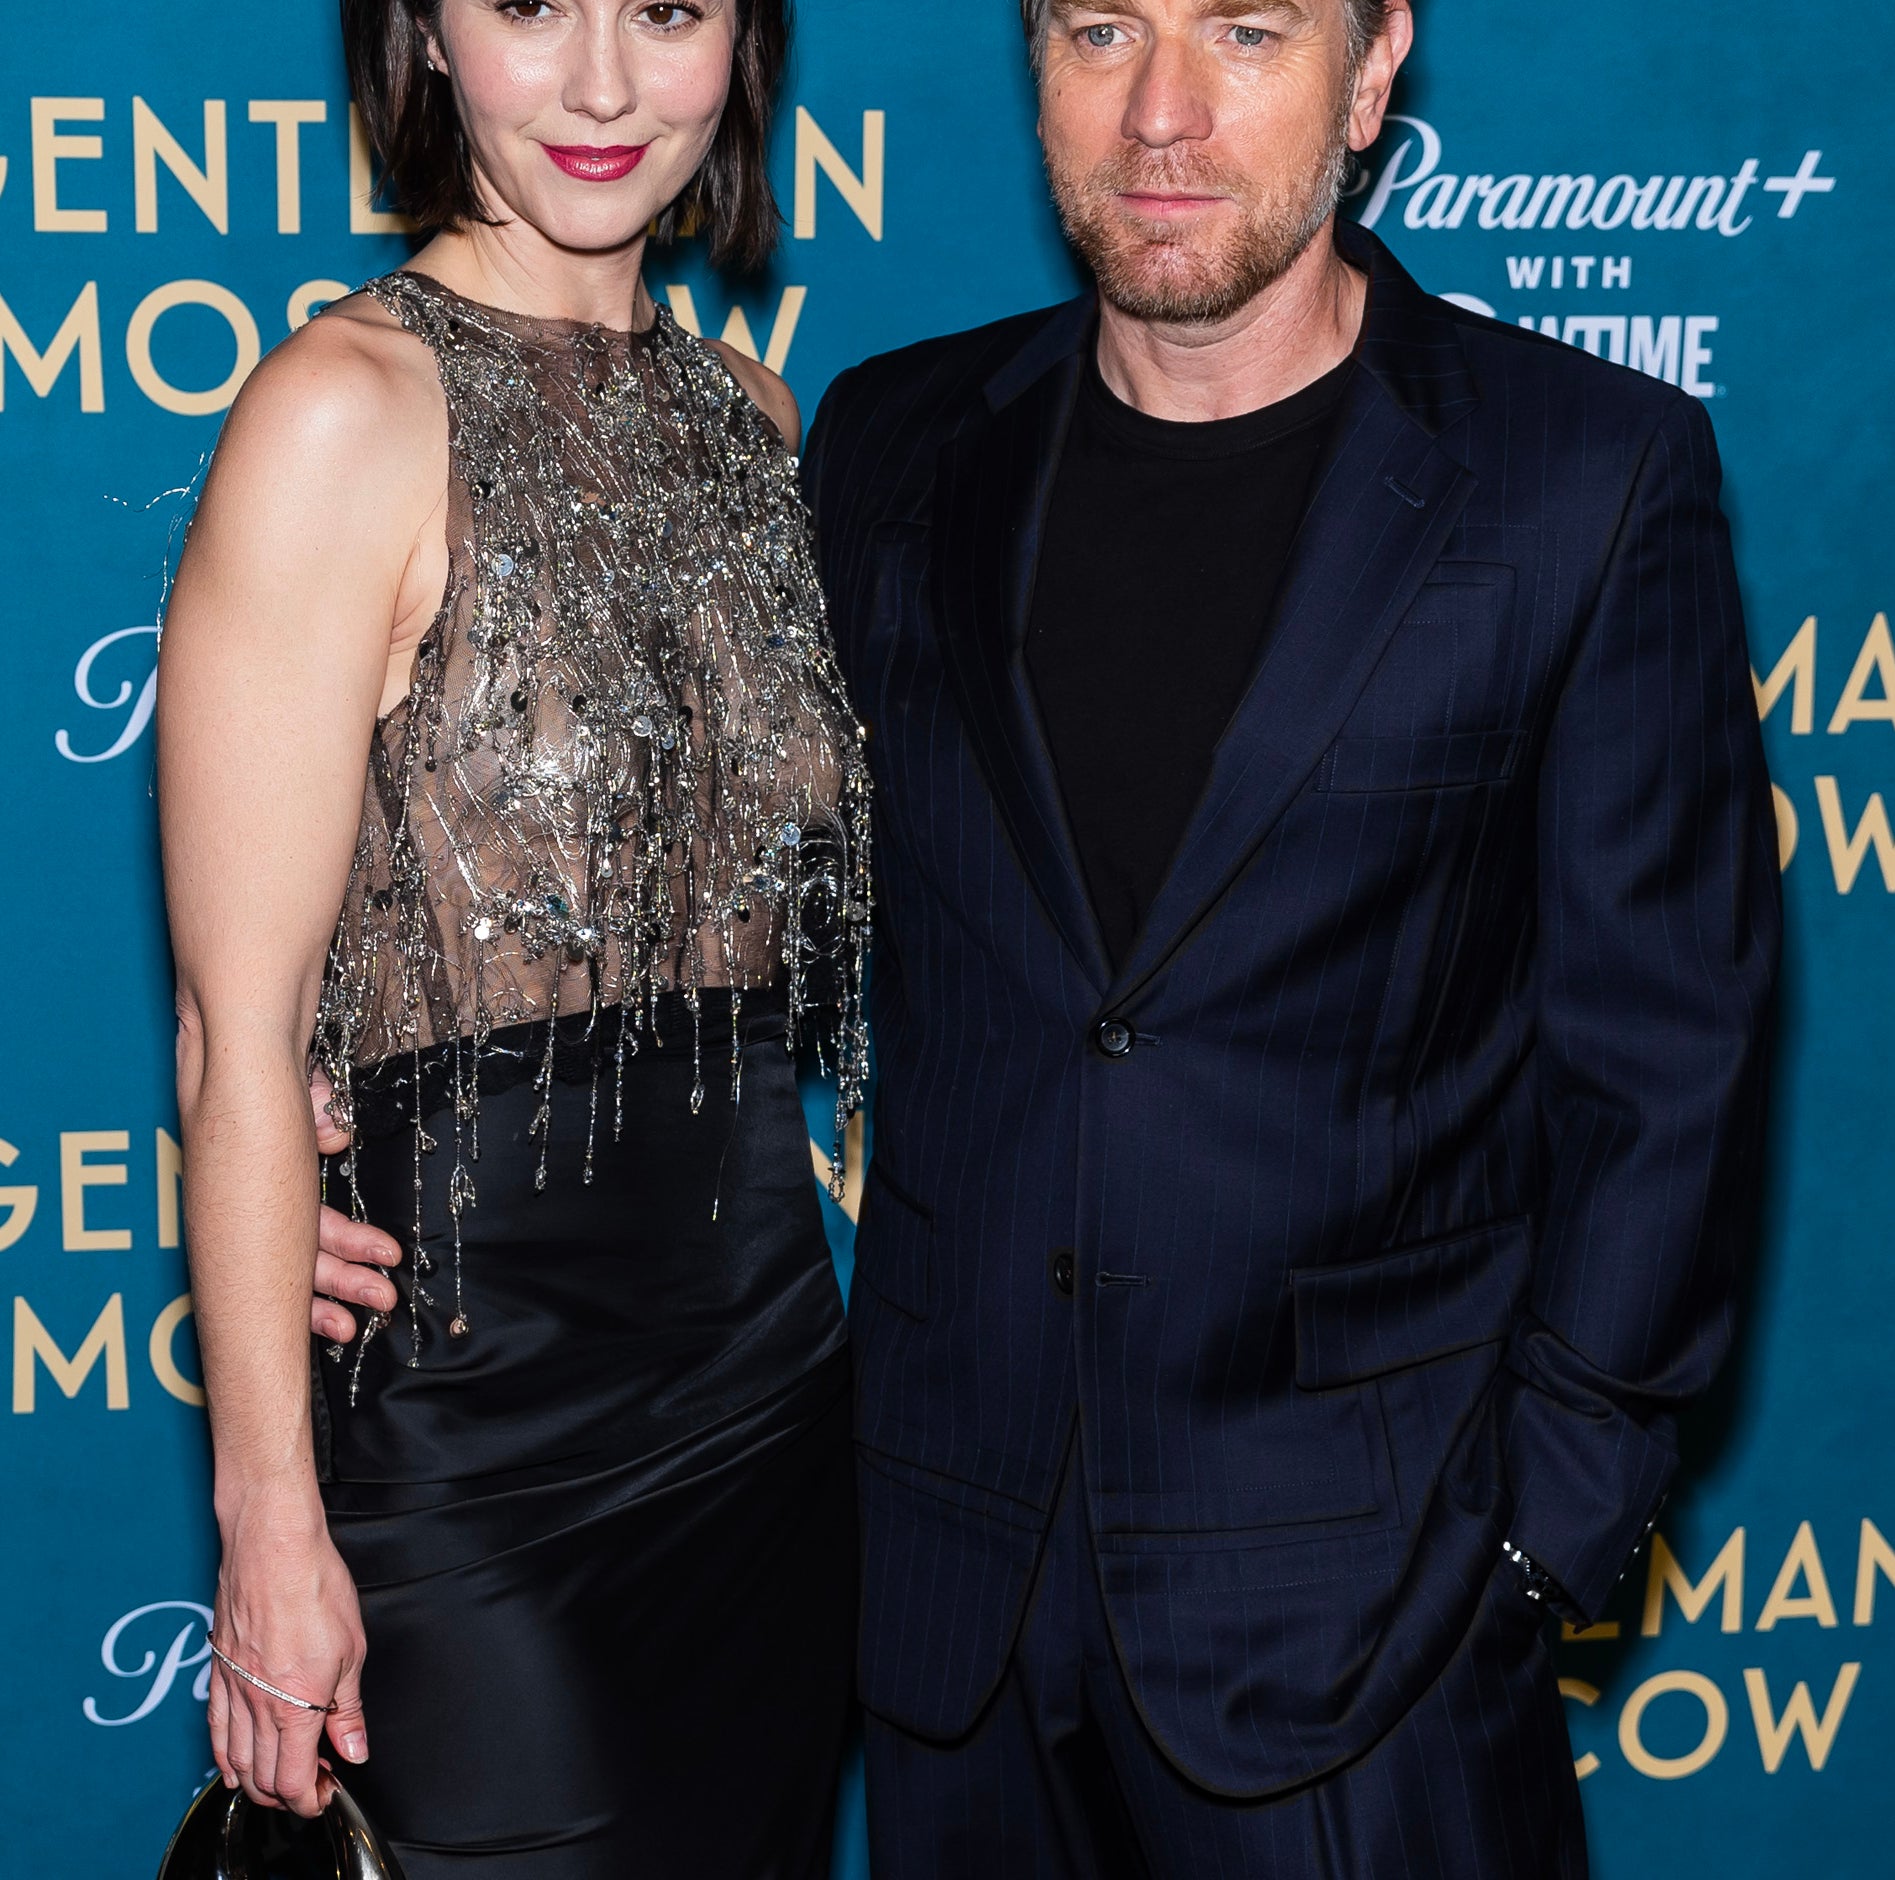 Ewan McGregor and Mary Elizabeth Winstead posing together at an event. She wears a beaded top and skirt; he sports a pinstripe suit